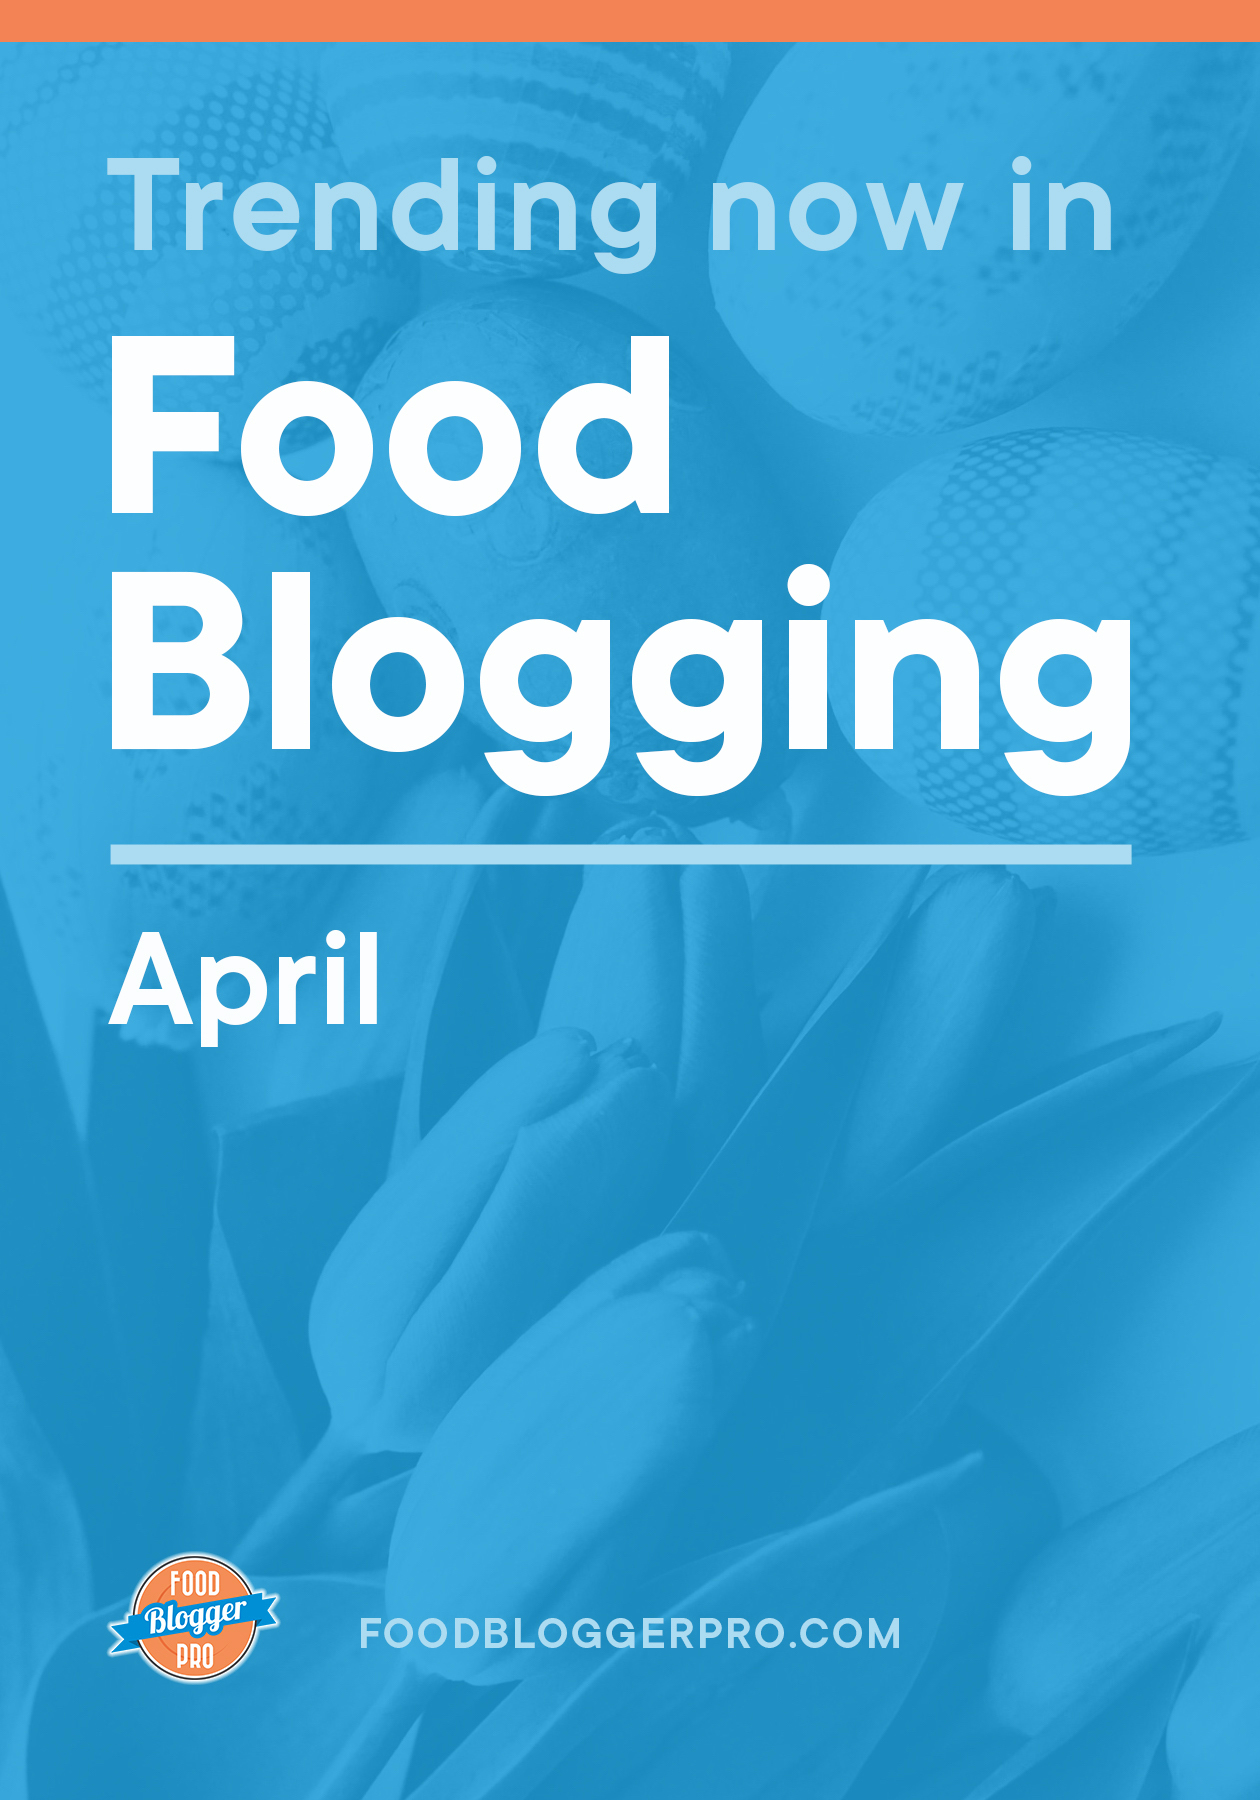 Blue graphic of flowers that reads 'Trending Now in Food Blogger - April' with the Food Blogger Pro logo